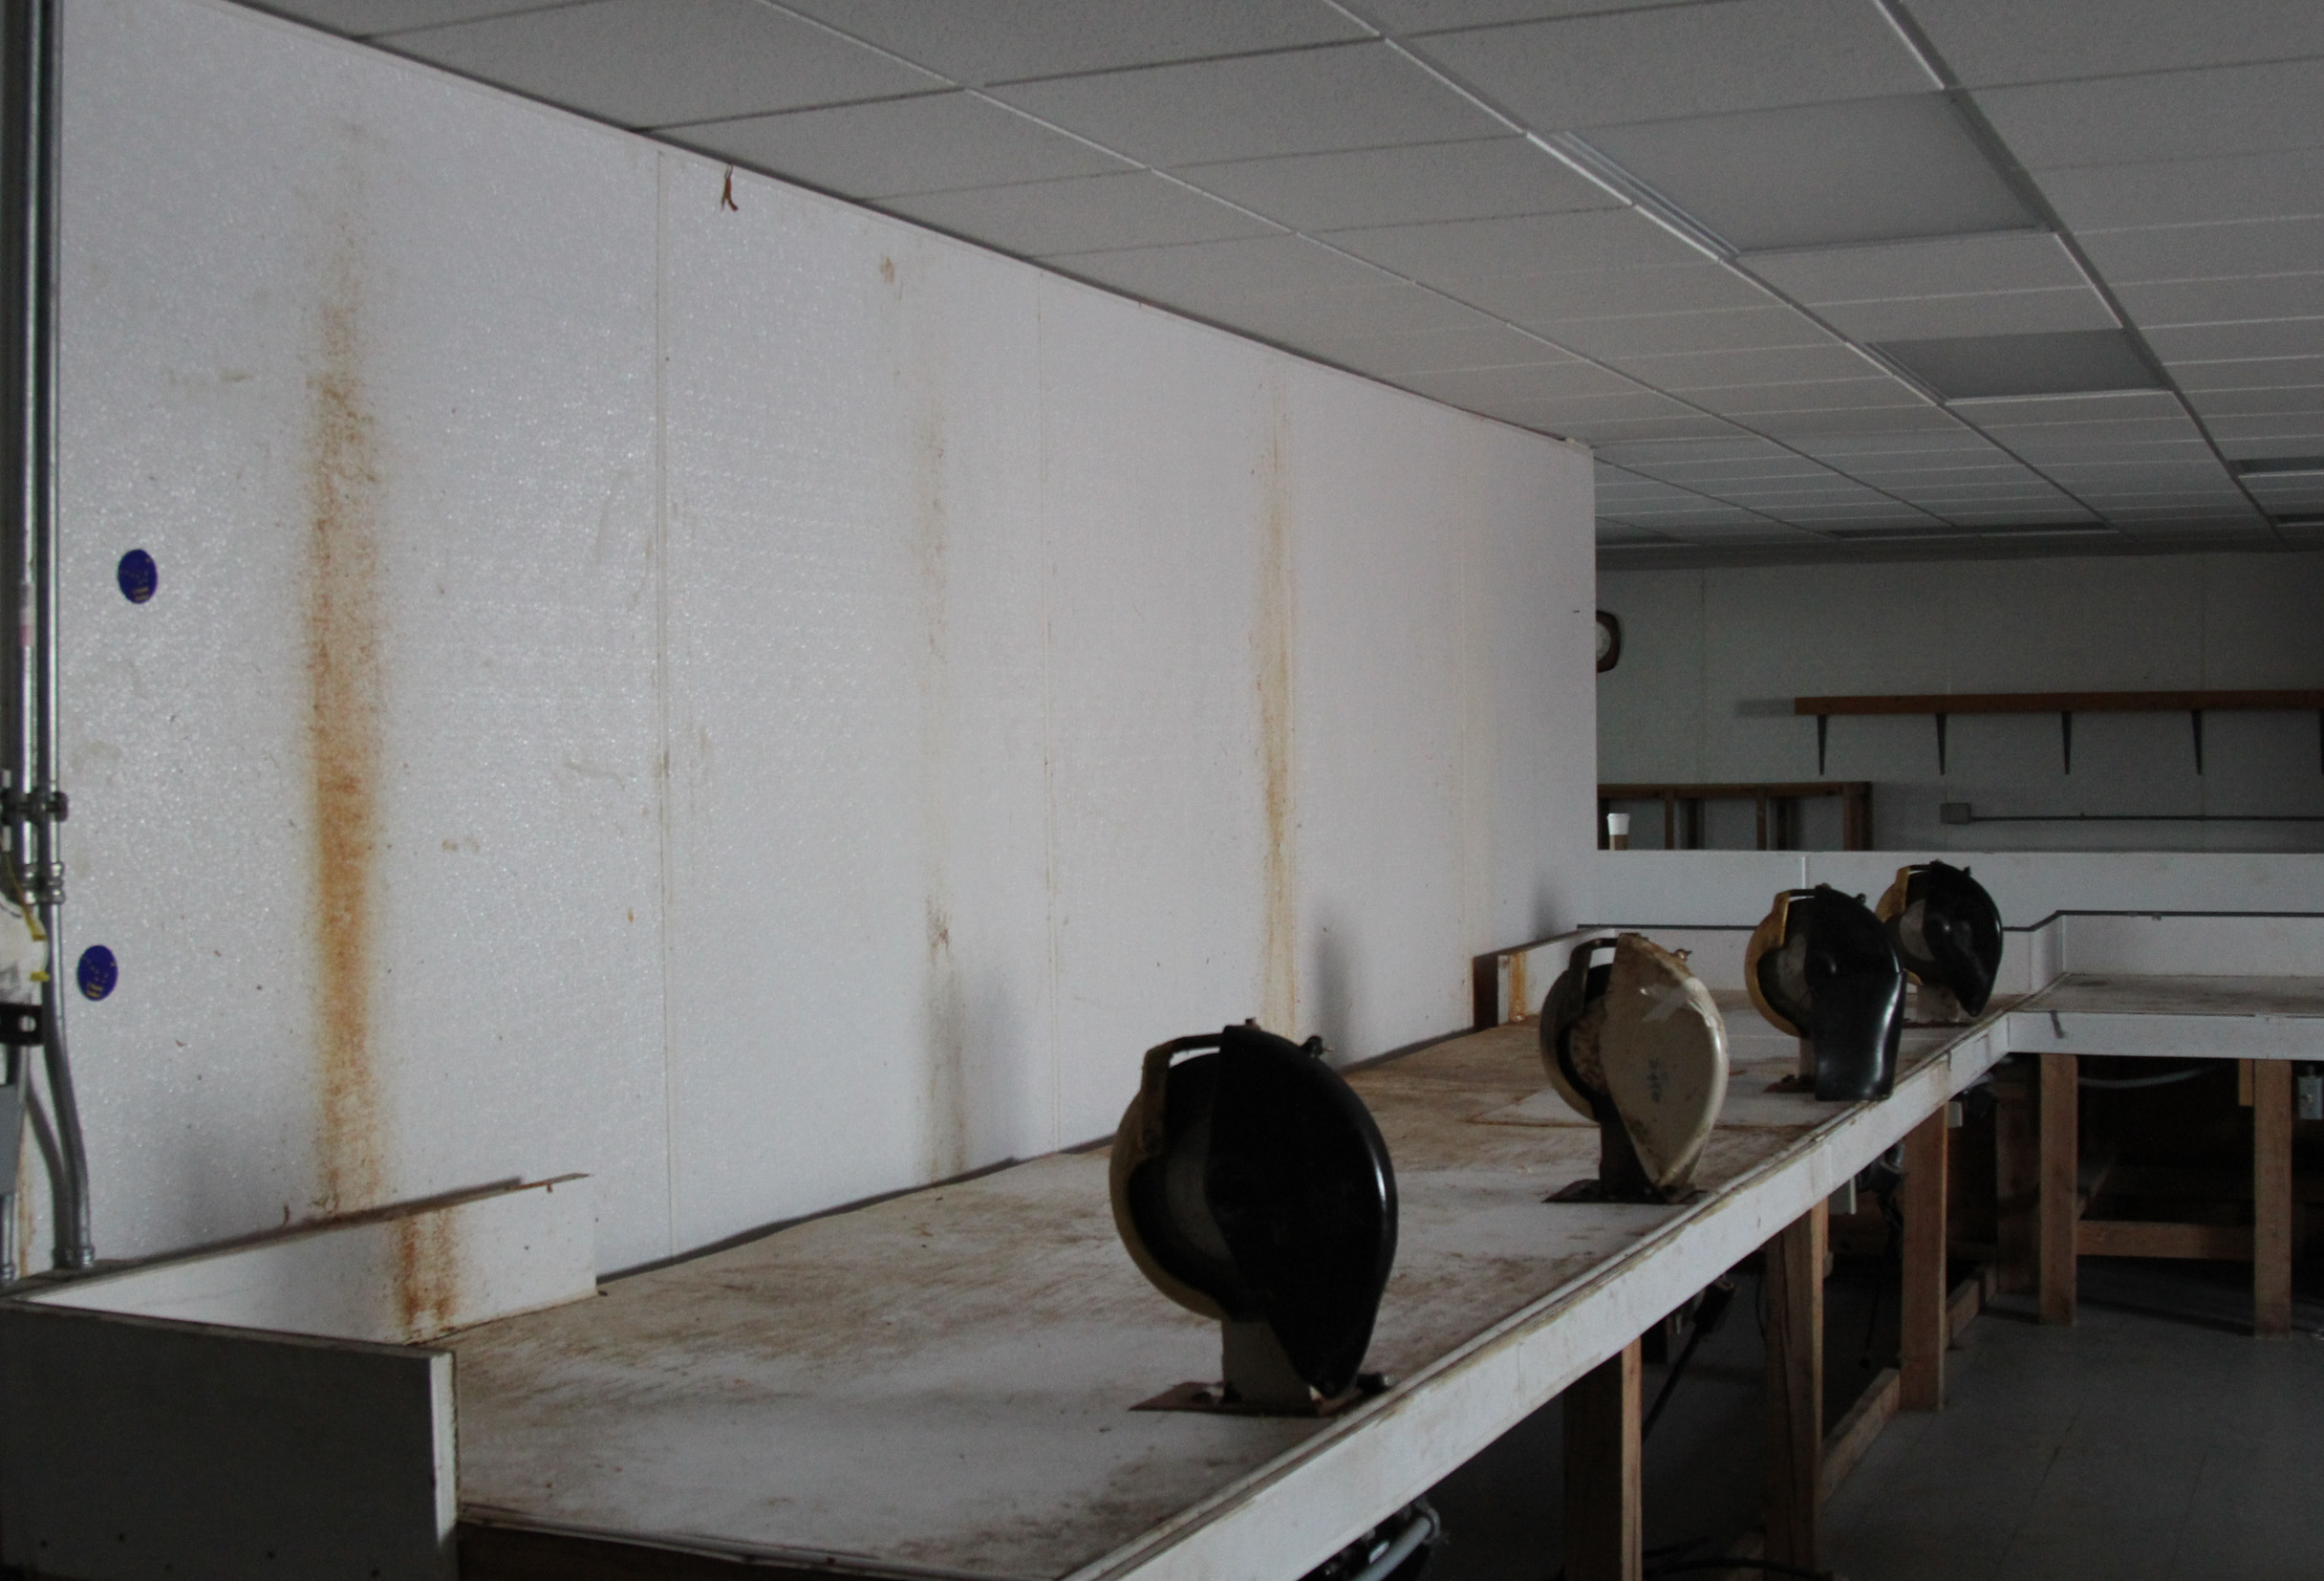 Fleshing machines had kicked off fat onto the walls. Dennis Sinook said they’d gotten to most of it, but run out of cleaning supplies before they could fully remove all the stains as the Shishmaref tannery was closed up for the season early in January. (Photo by Zachariah Hughes/Alaska Public Media)